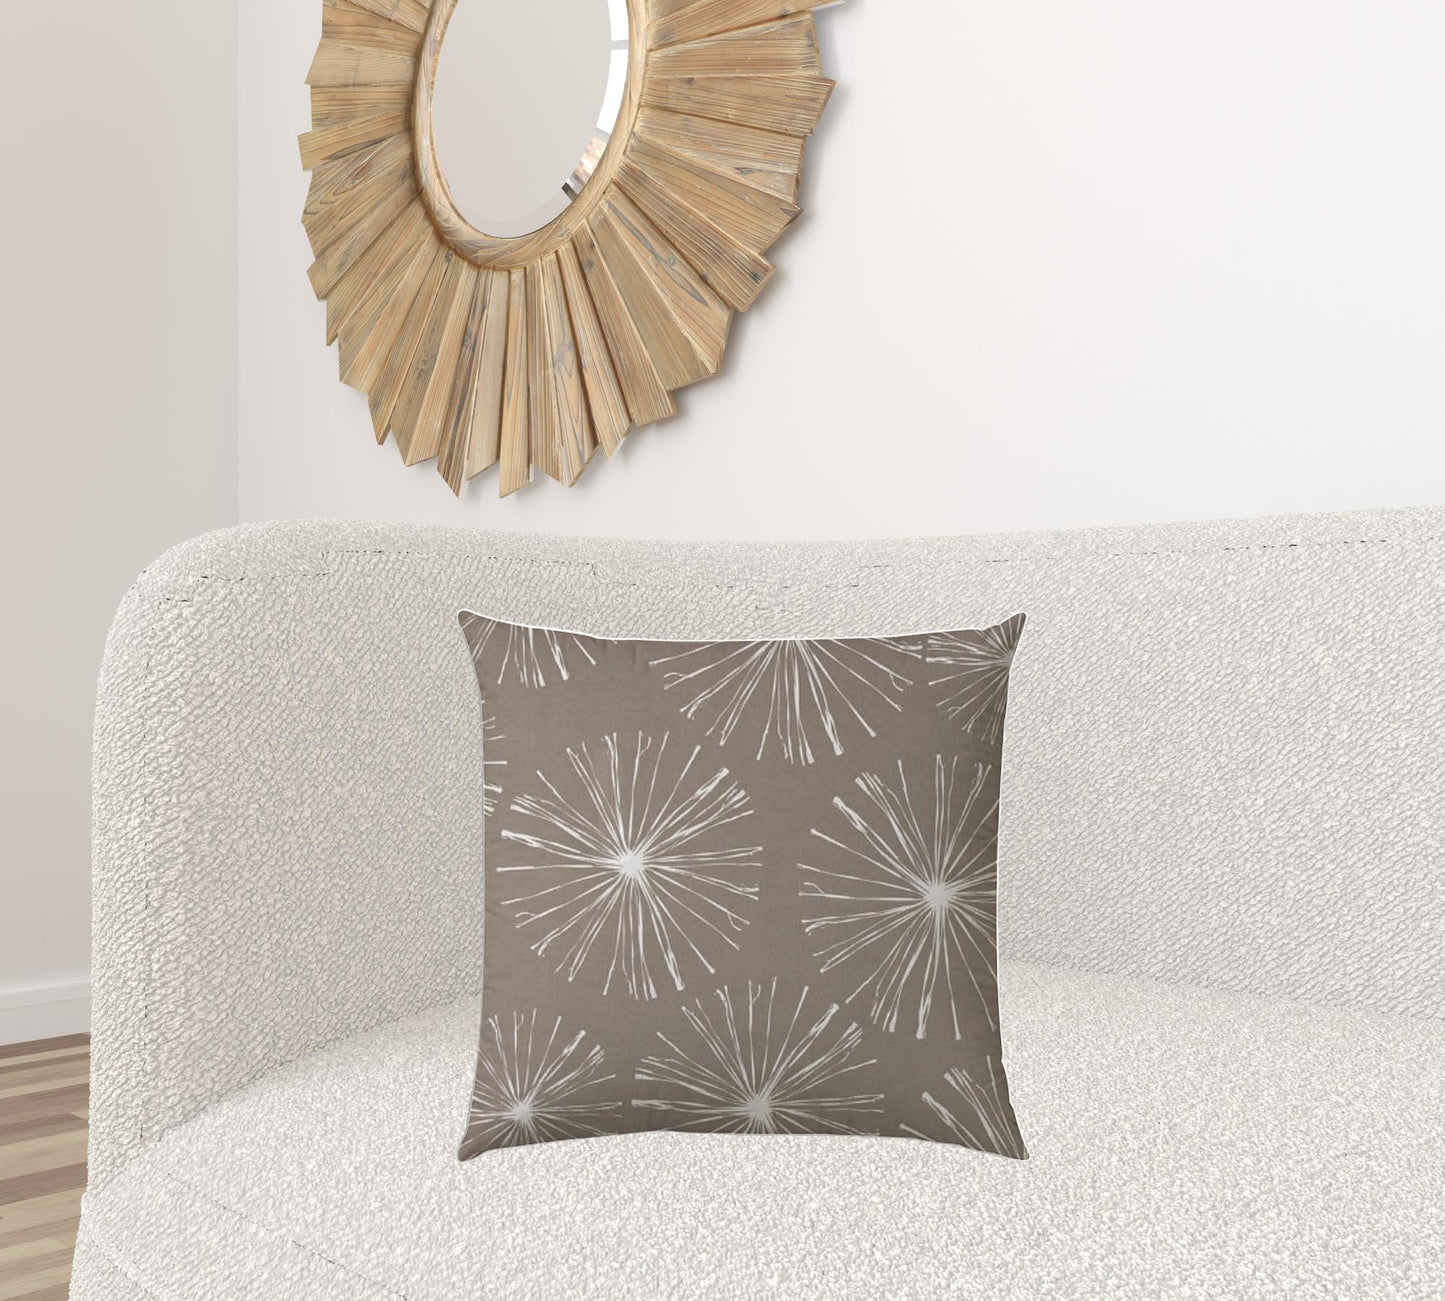 20" X 20" Taupe And White Blown Seam Floral Throw Indoor Outdoor Pillow